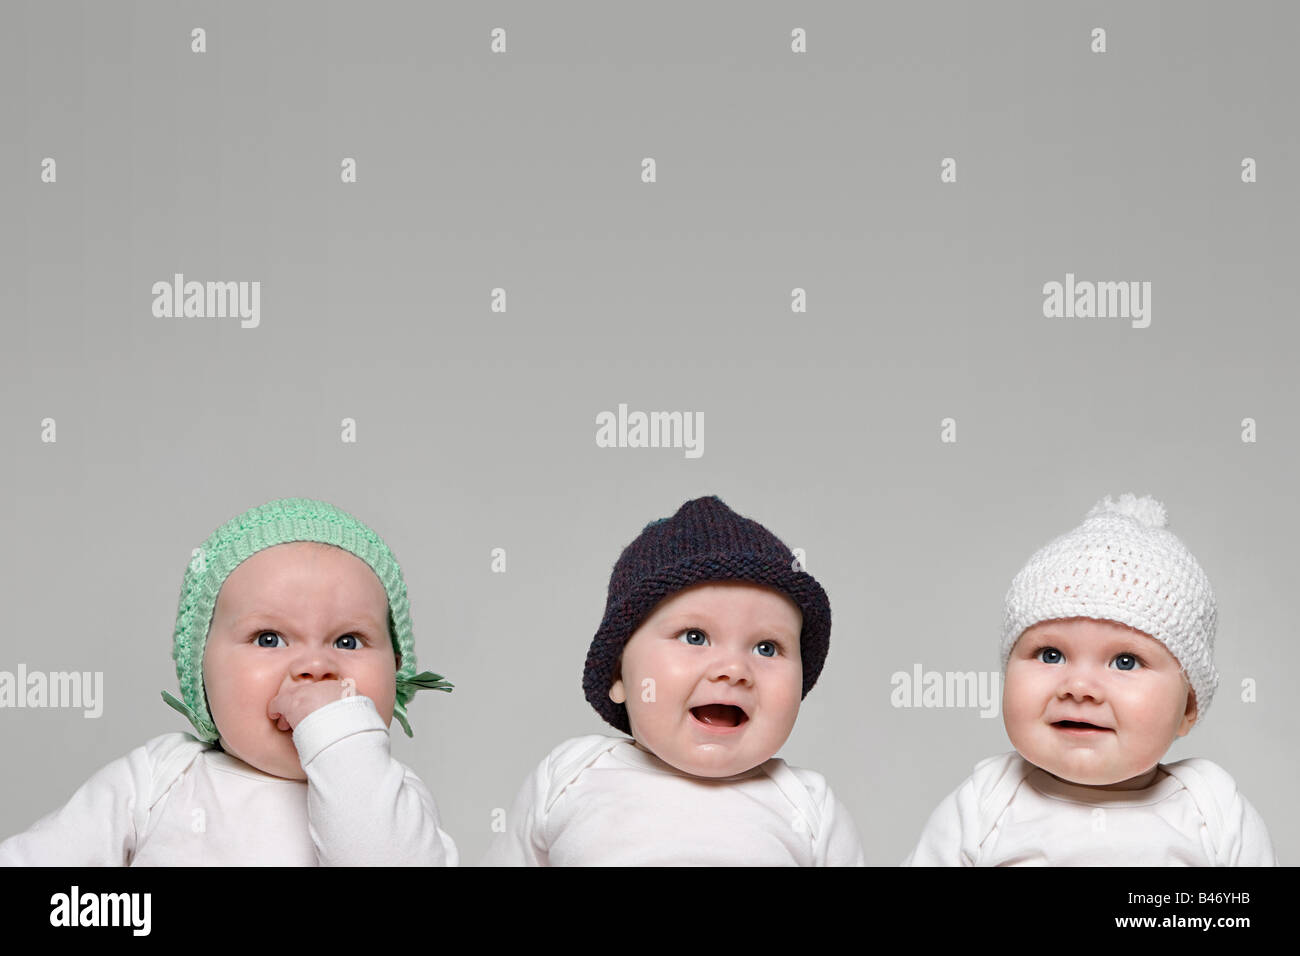 Babies in hats Stock Photo